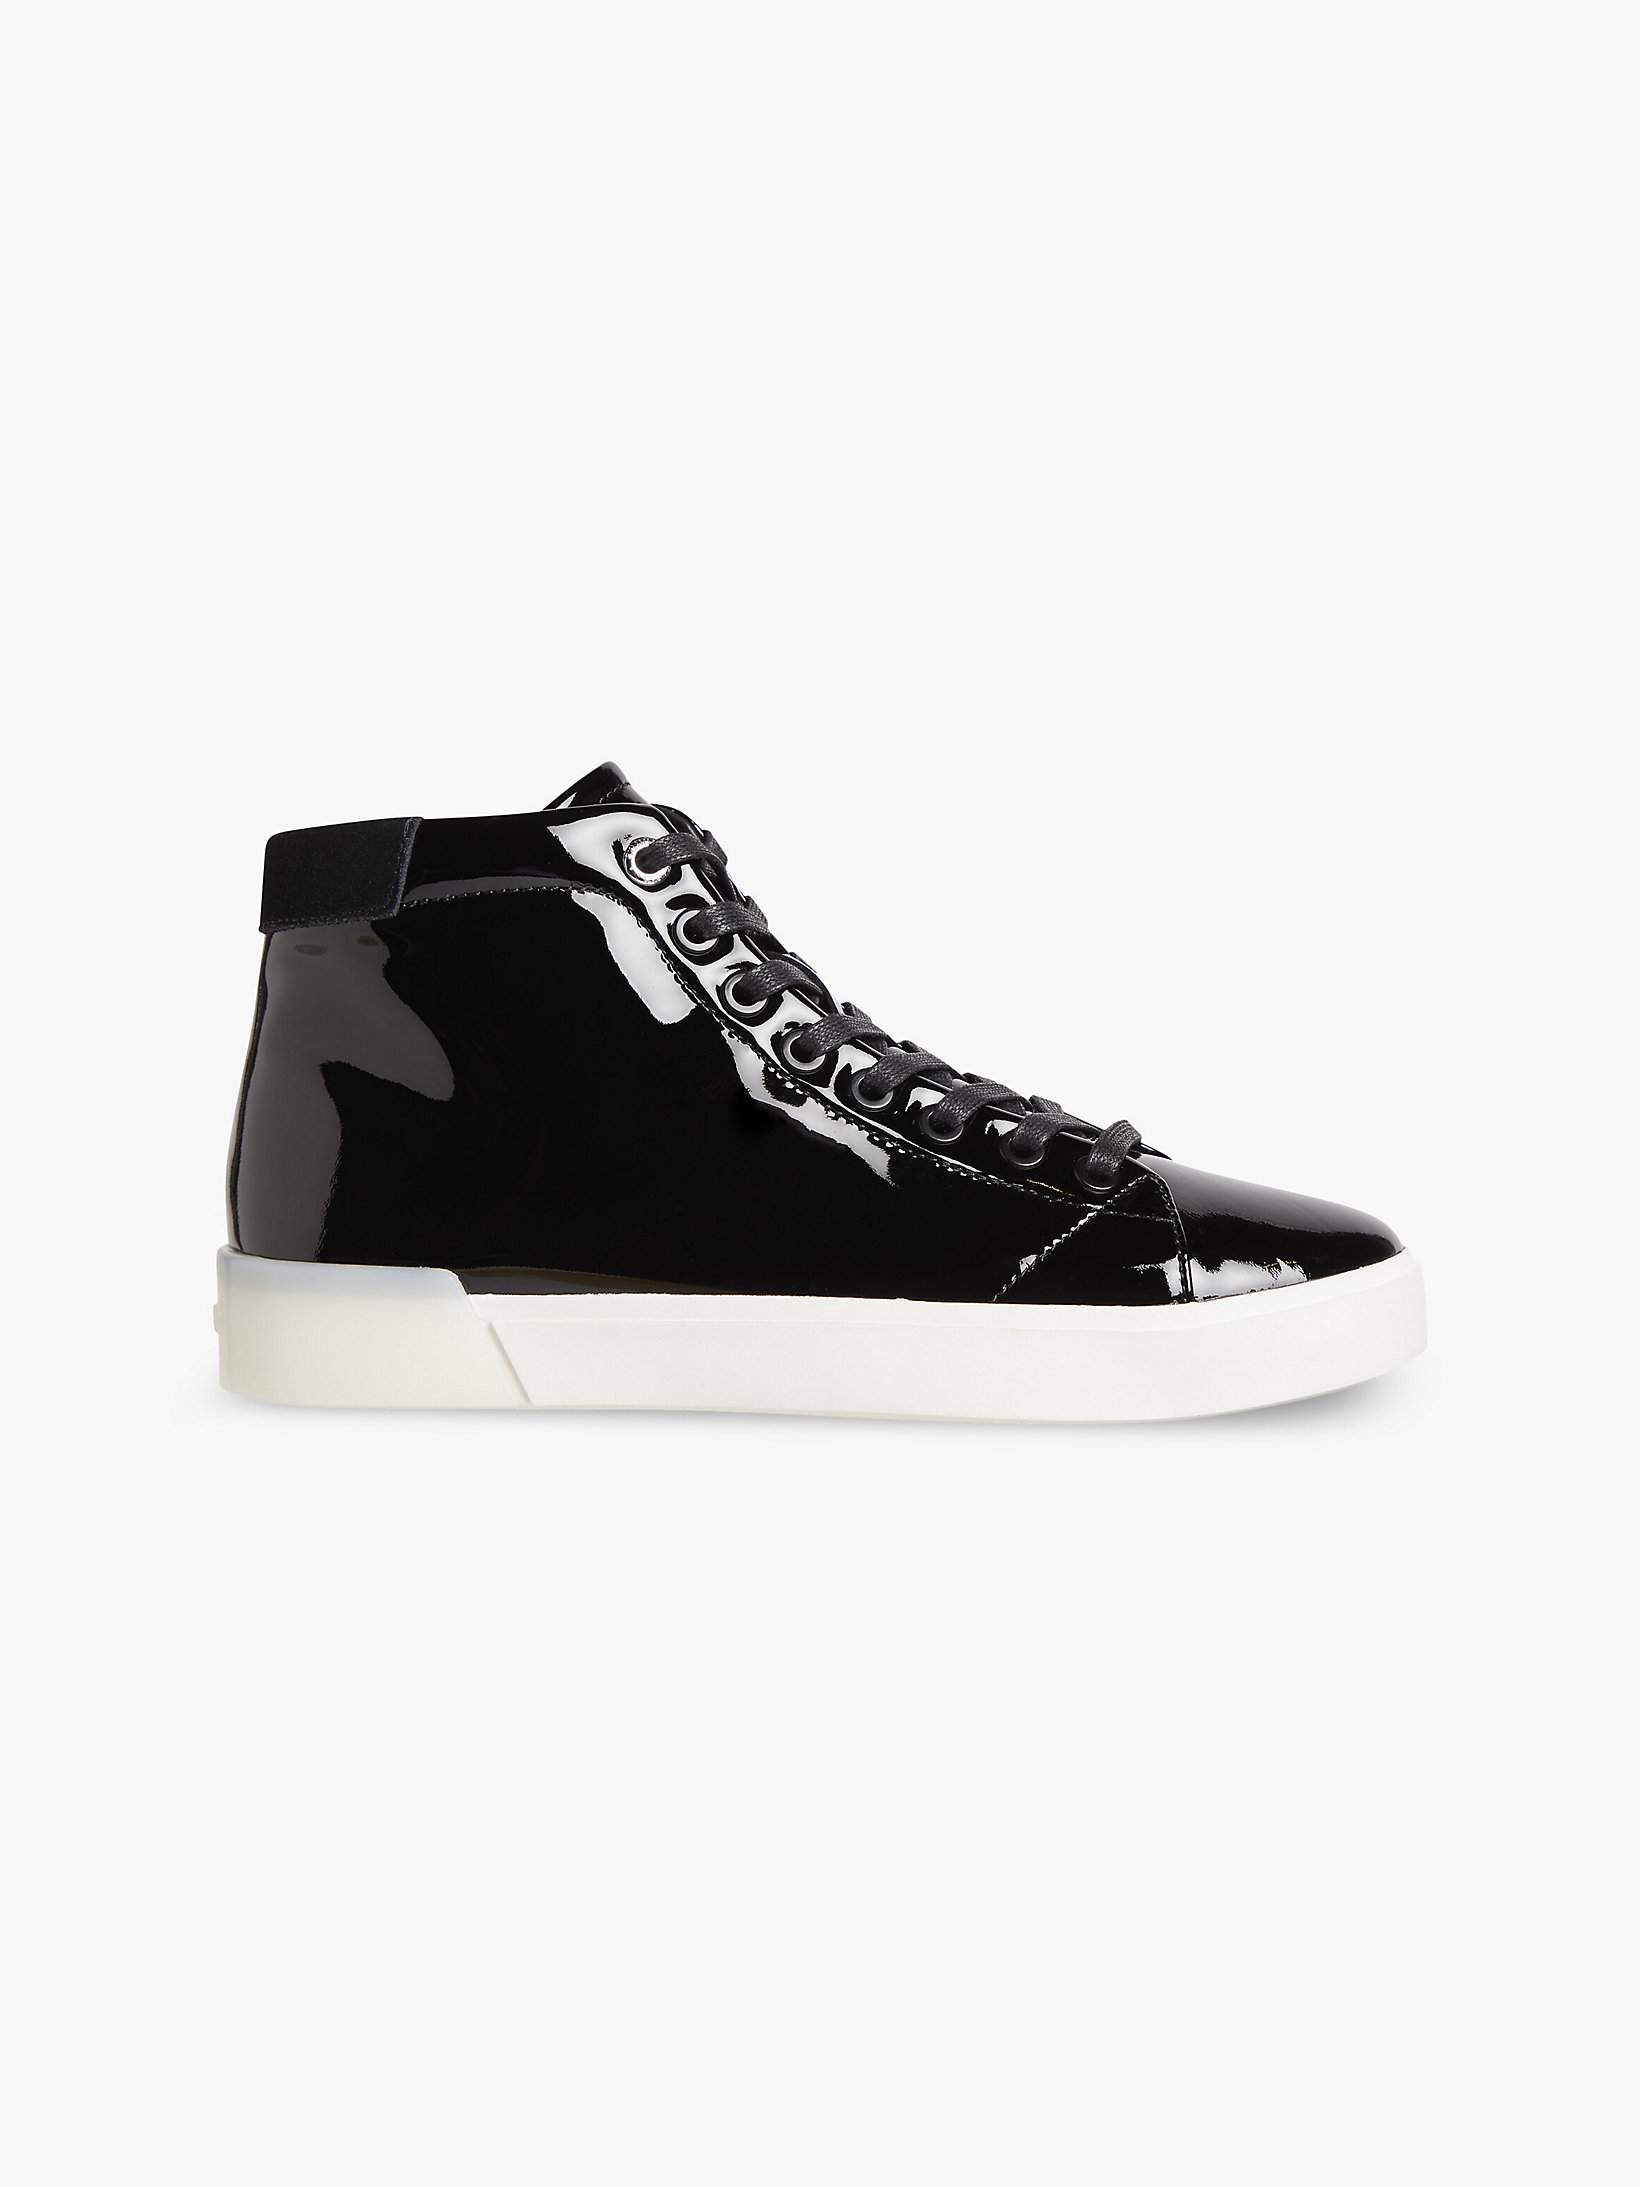 CK Black Leather High-Top Trainers undefined women Calvin Klein